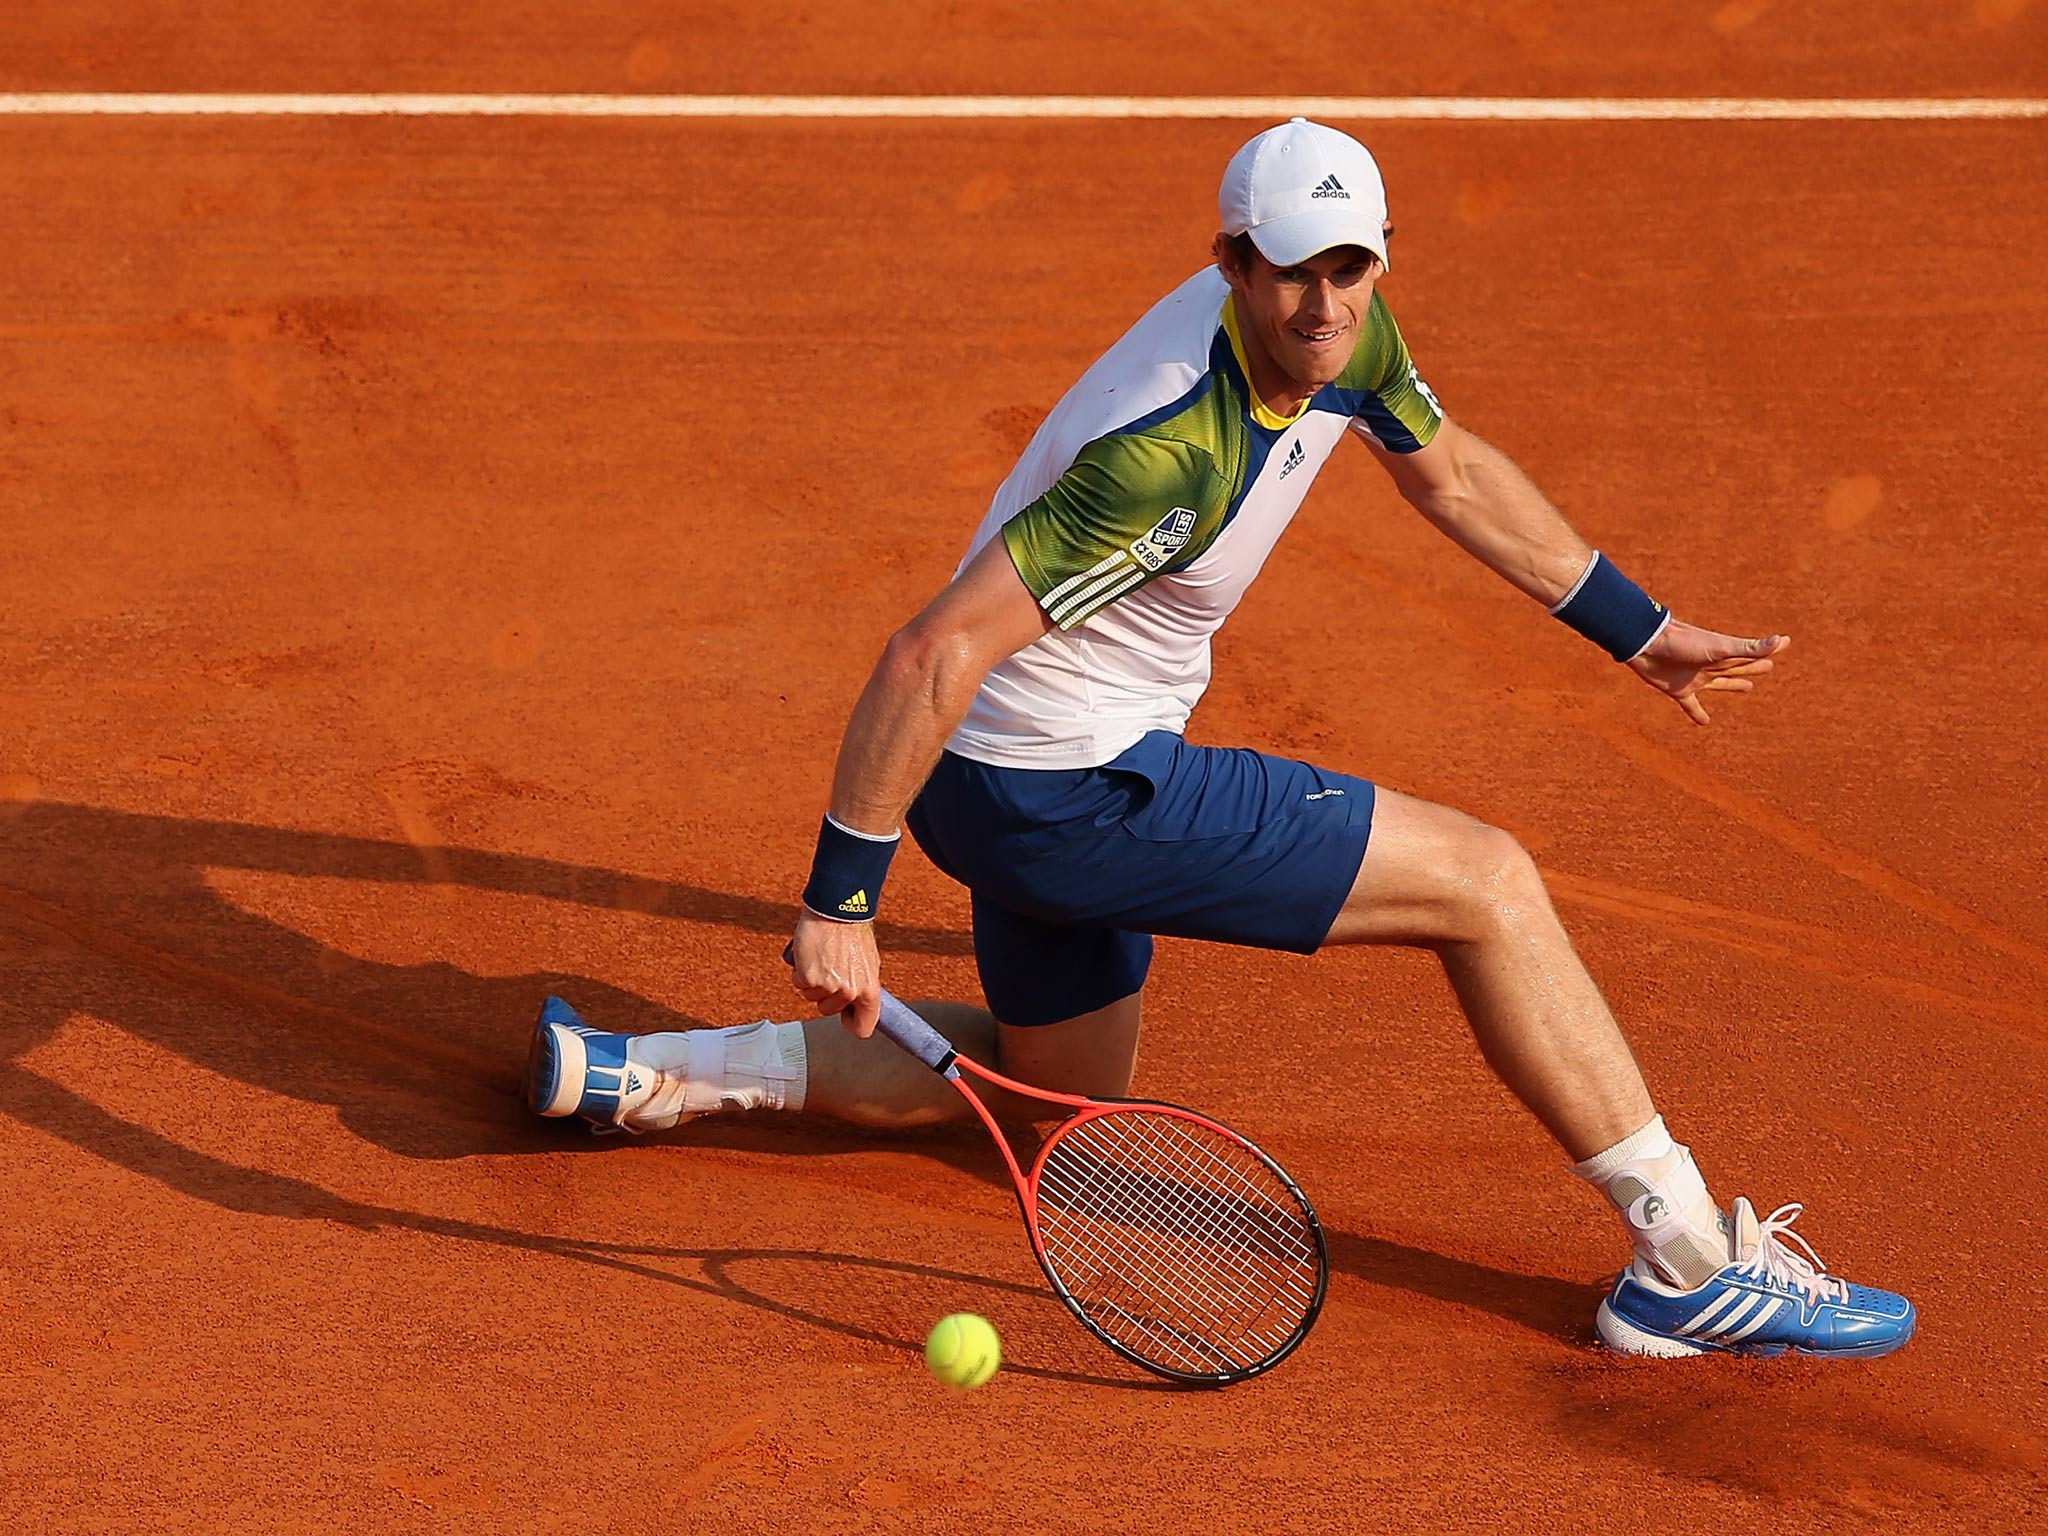 Andy Murray of Great Britain plays a backhand volley against Edouard Roger-Vasselin of France in their second round match during day four of the ATP Monte Carlo Masters